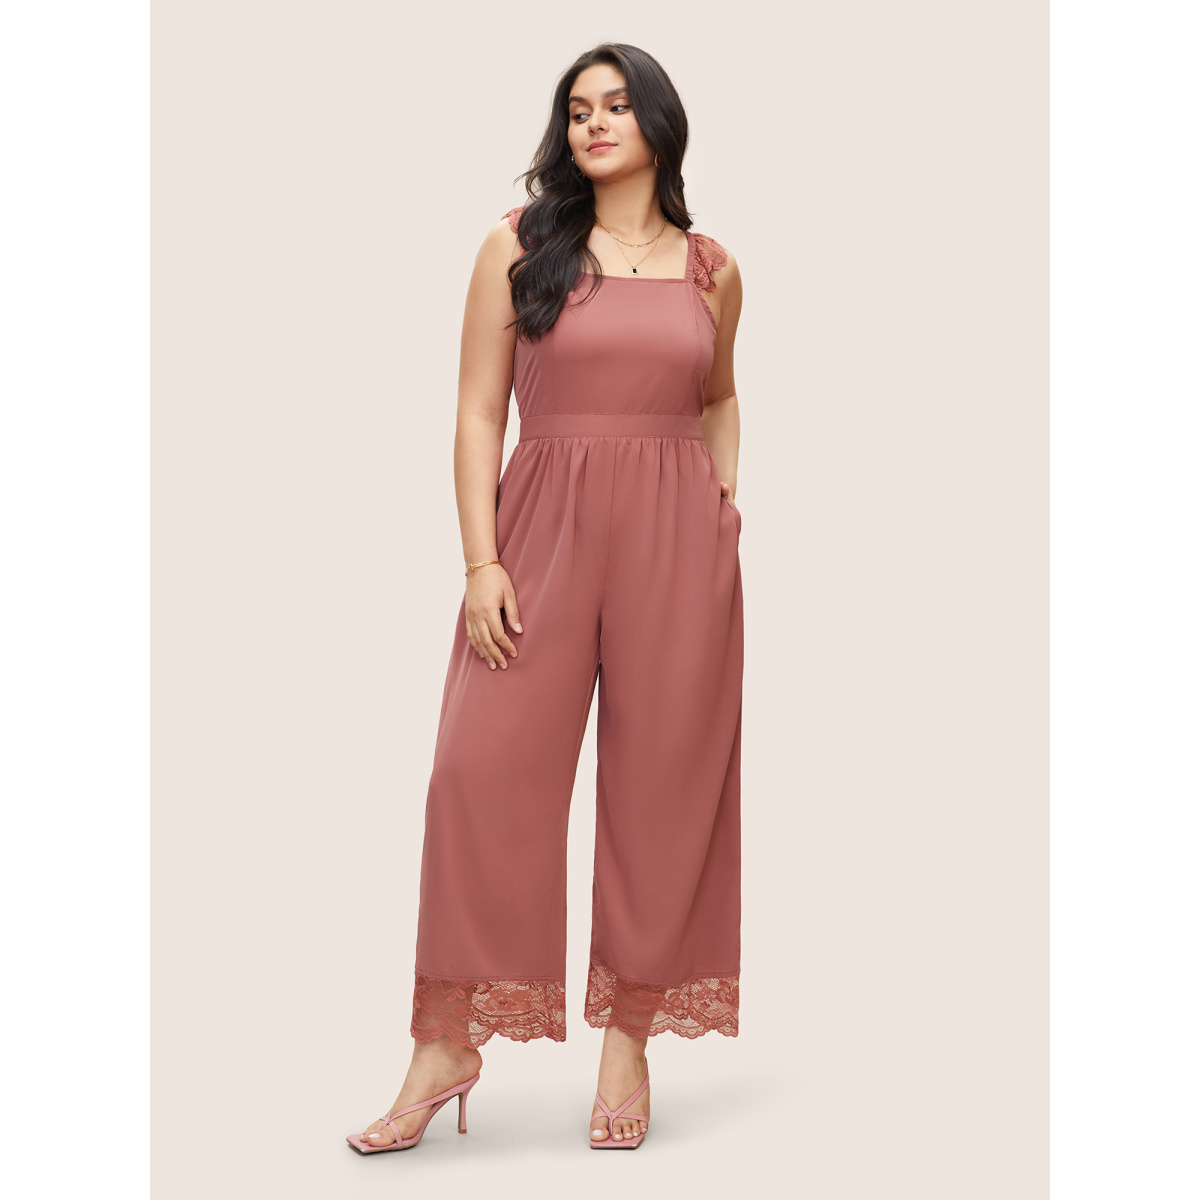 

Plus Size Russet Solid Pocket Lace Panel Ruffles Pleated Cami Jumpsuit Women Elegant Non Everyday Loose Jumpsuits BloomChic